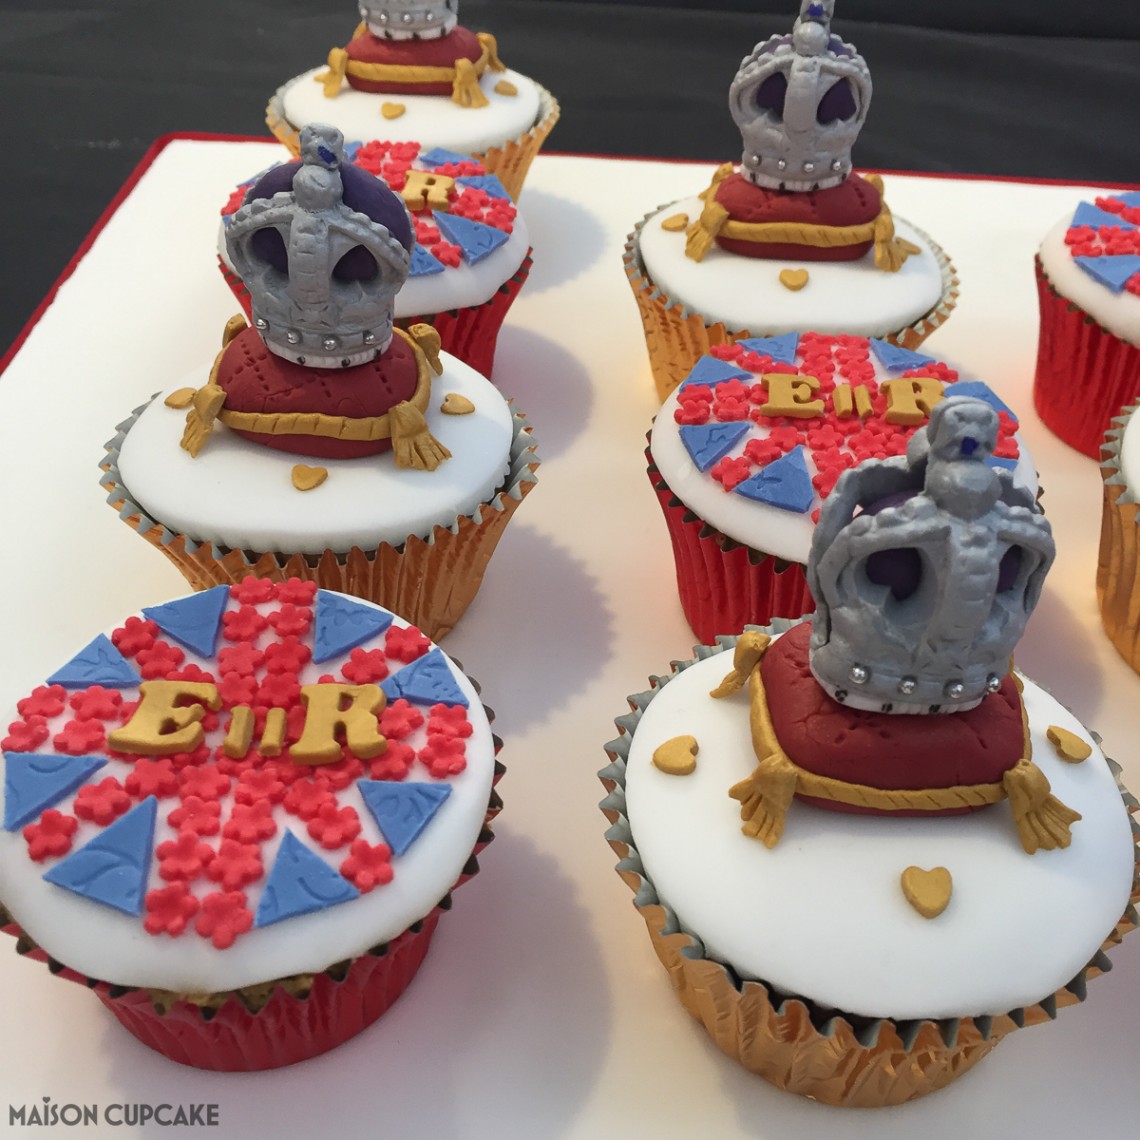 Queen's 90th Birthday Cupcakes by Jan Bourne